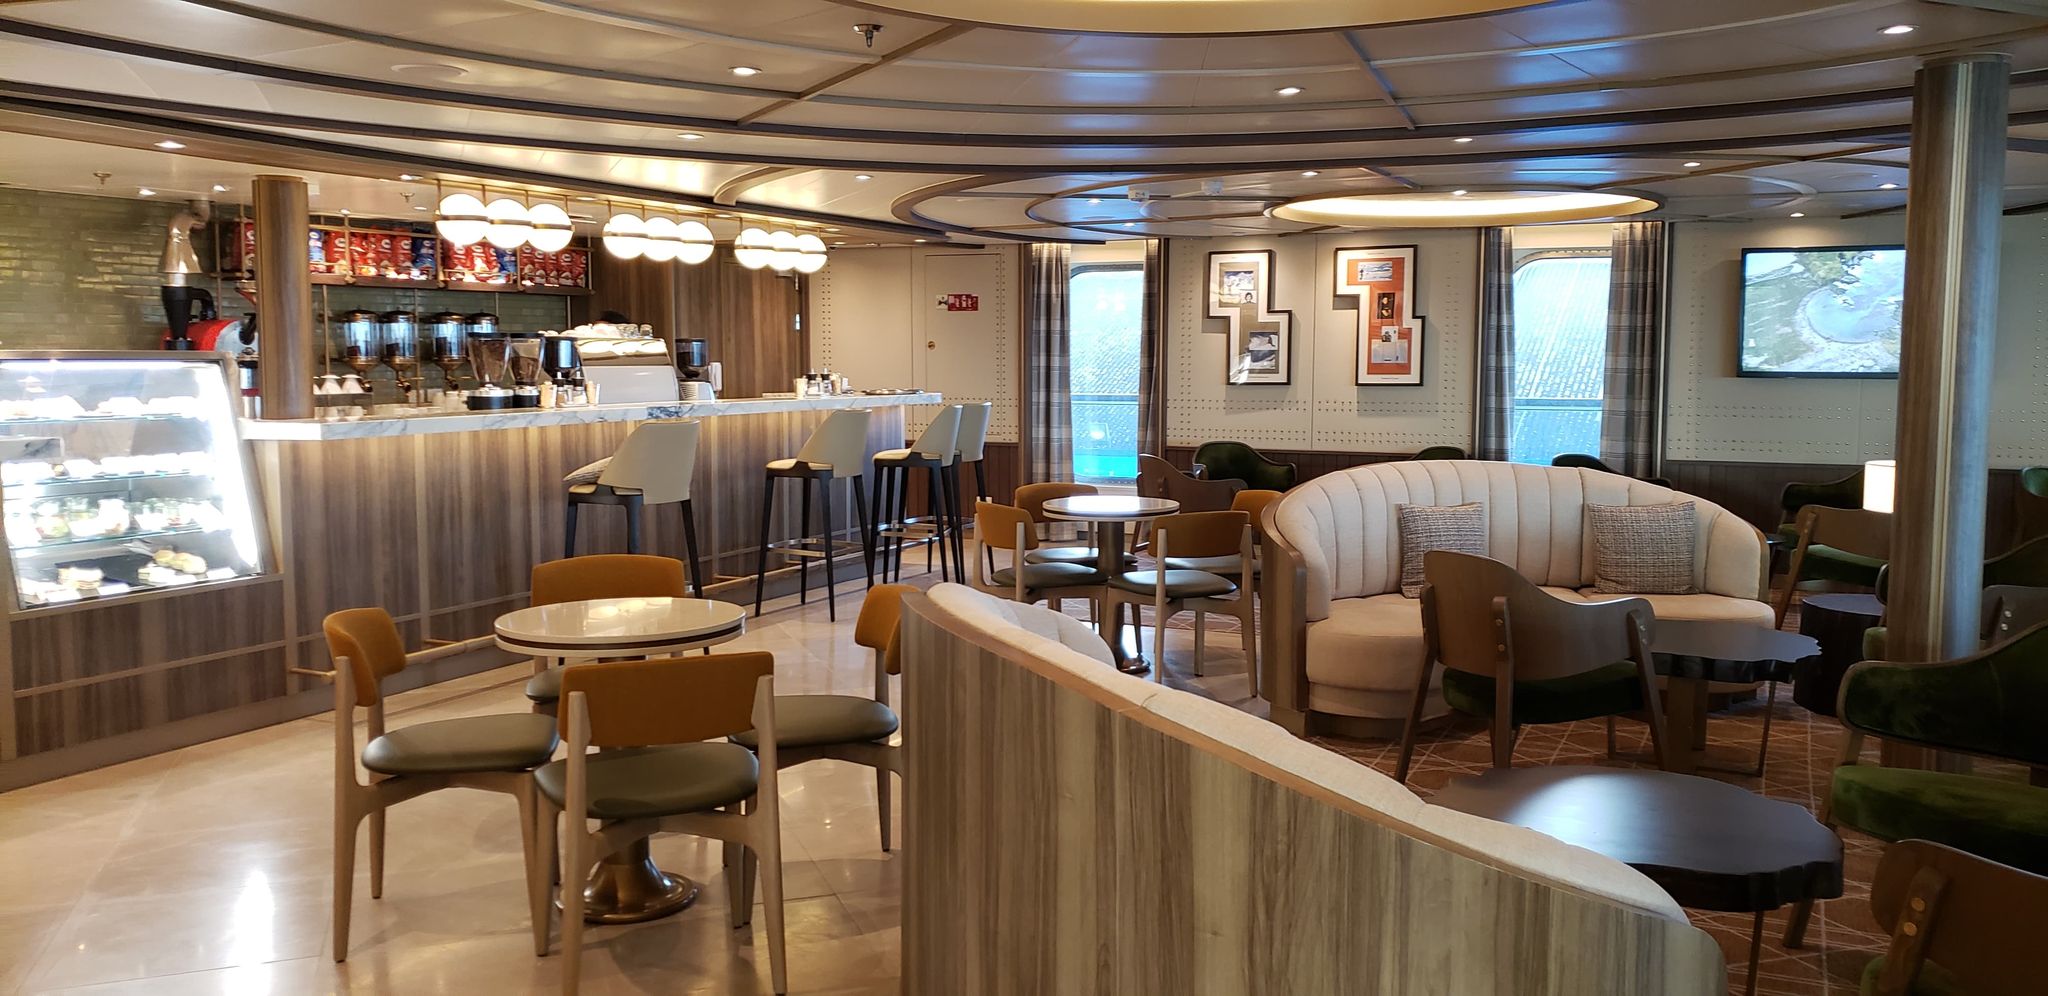 Seabourn Square on Seabourn Venture is a spacious gathering area. Photo by Susan J. Young